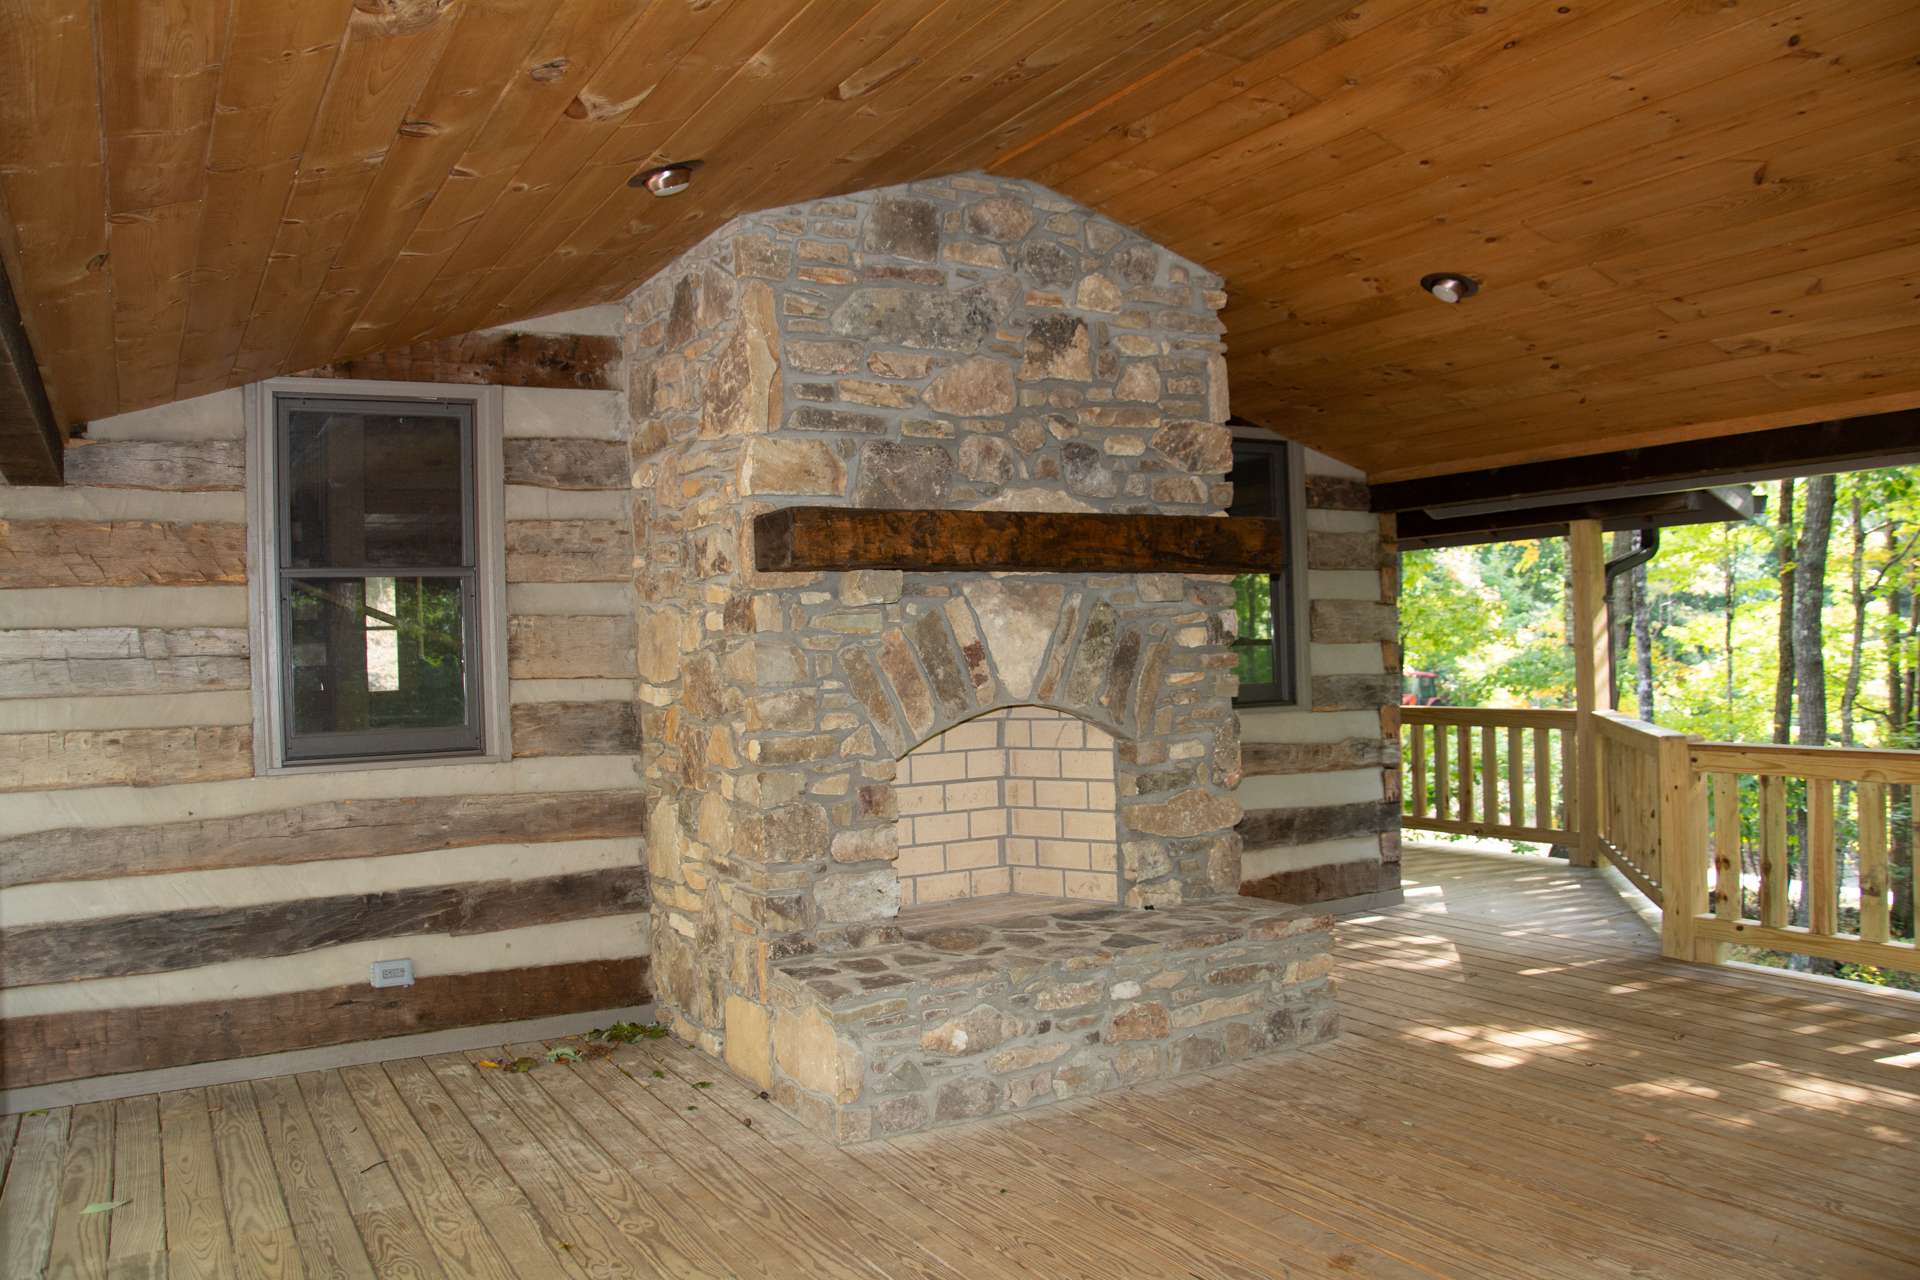 The main level offers a vaulted covered deck area with outdoor stone fireplace to enjoy the views of the surrounding woodlands and the sounds of a bold mountain stream below.